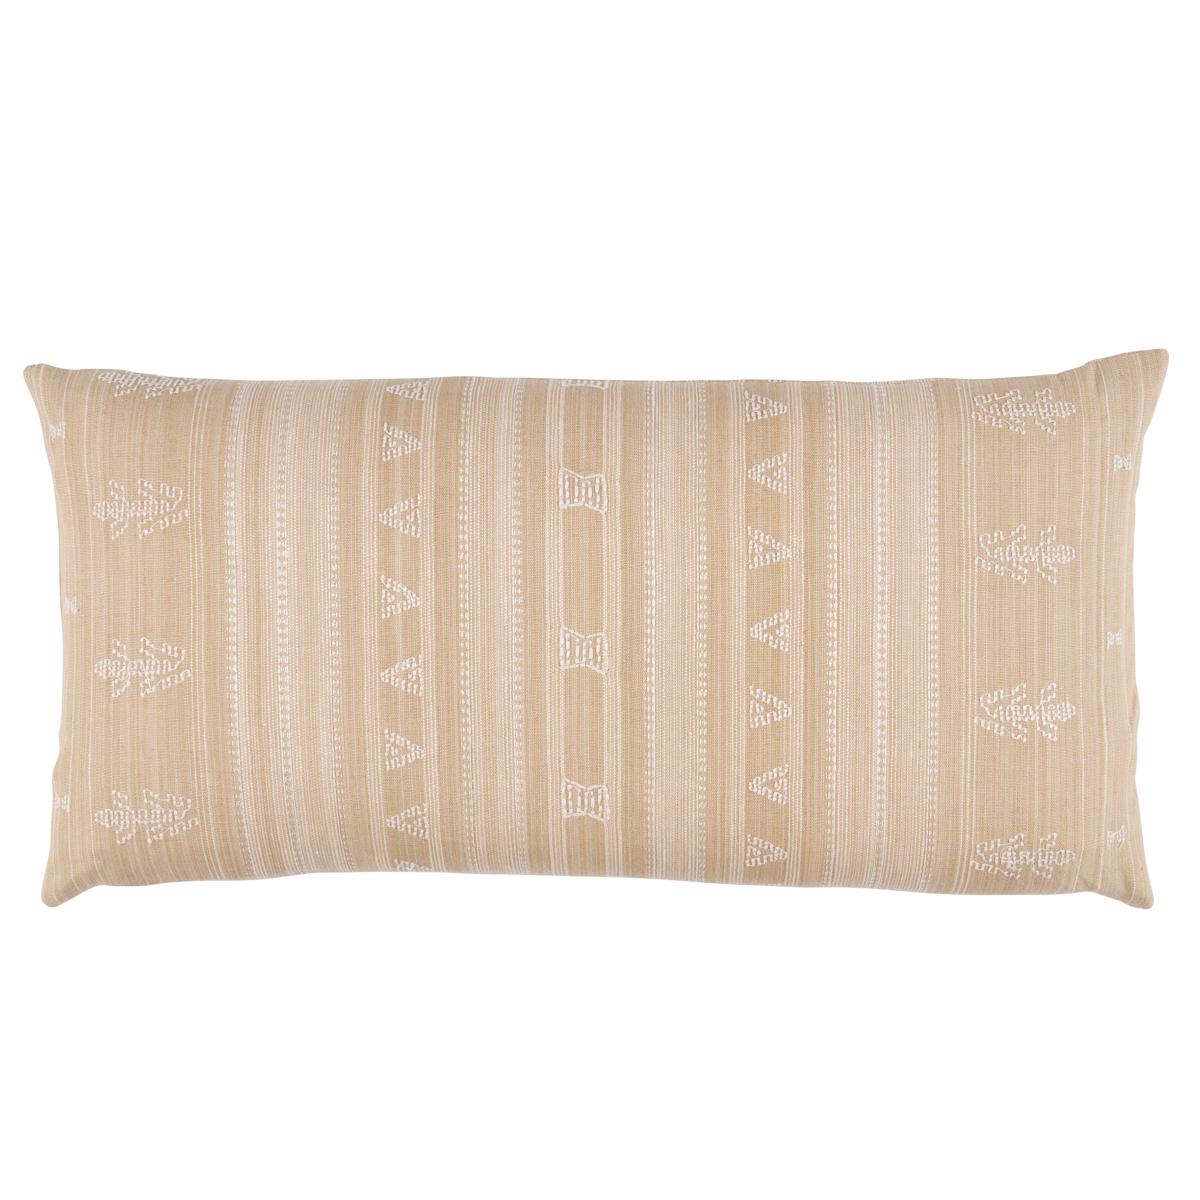 Nima Embroidered Pillow in Tan 24 x 12"